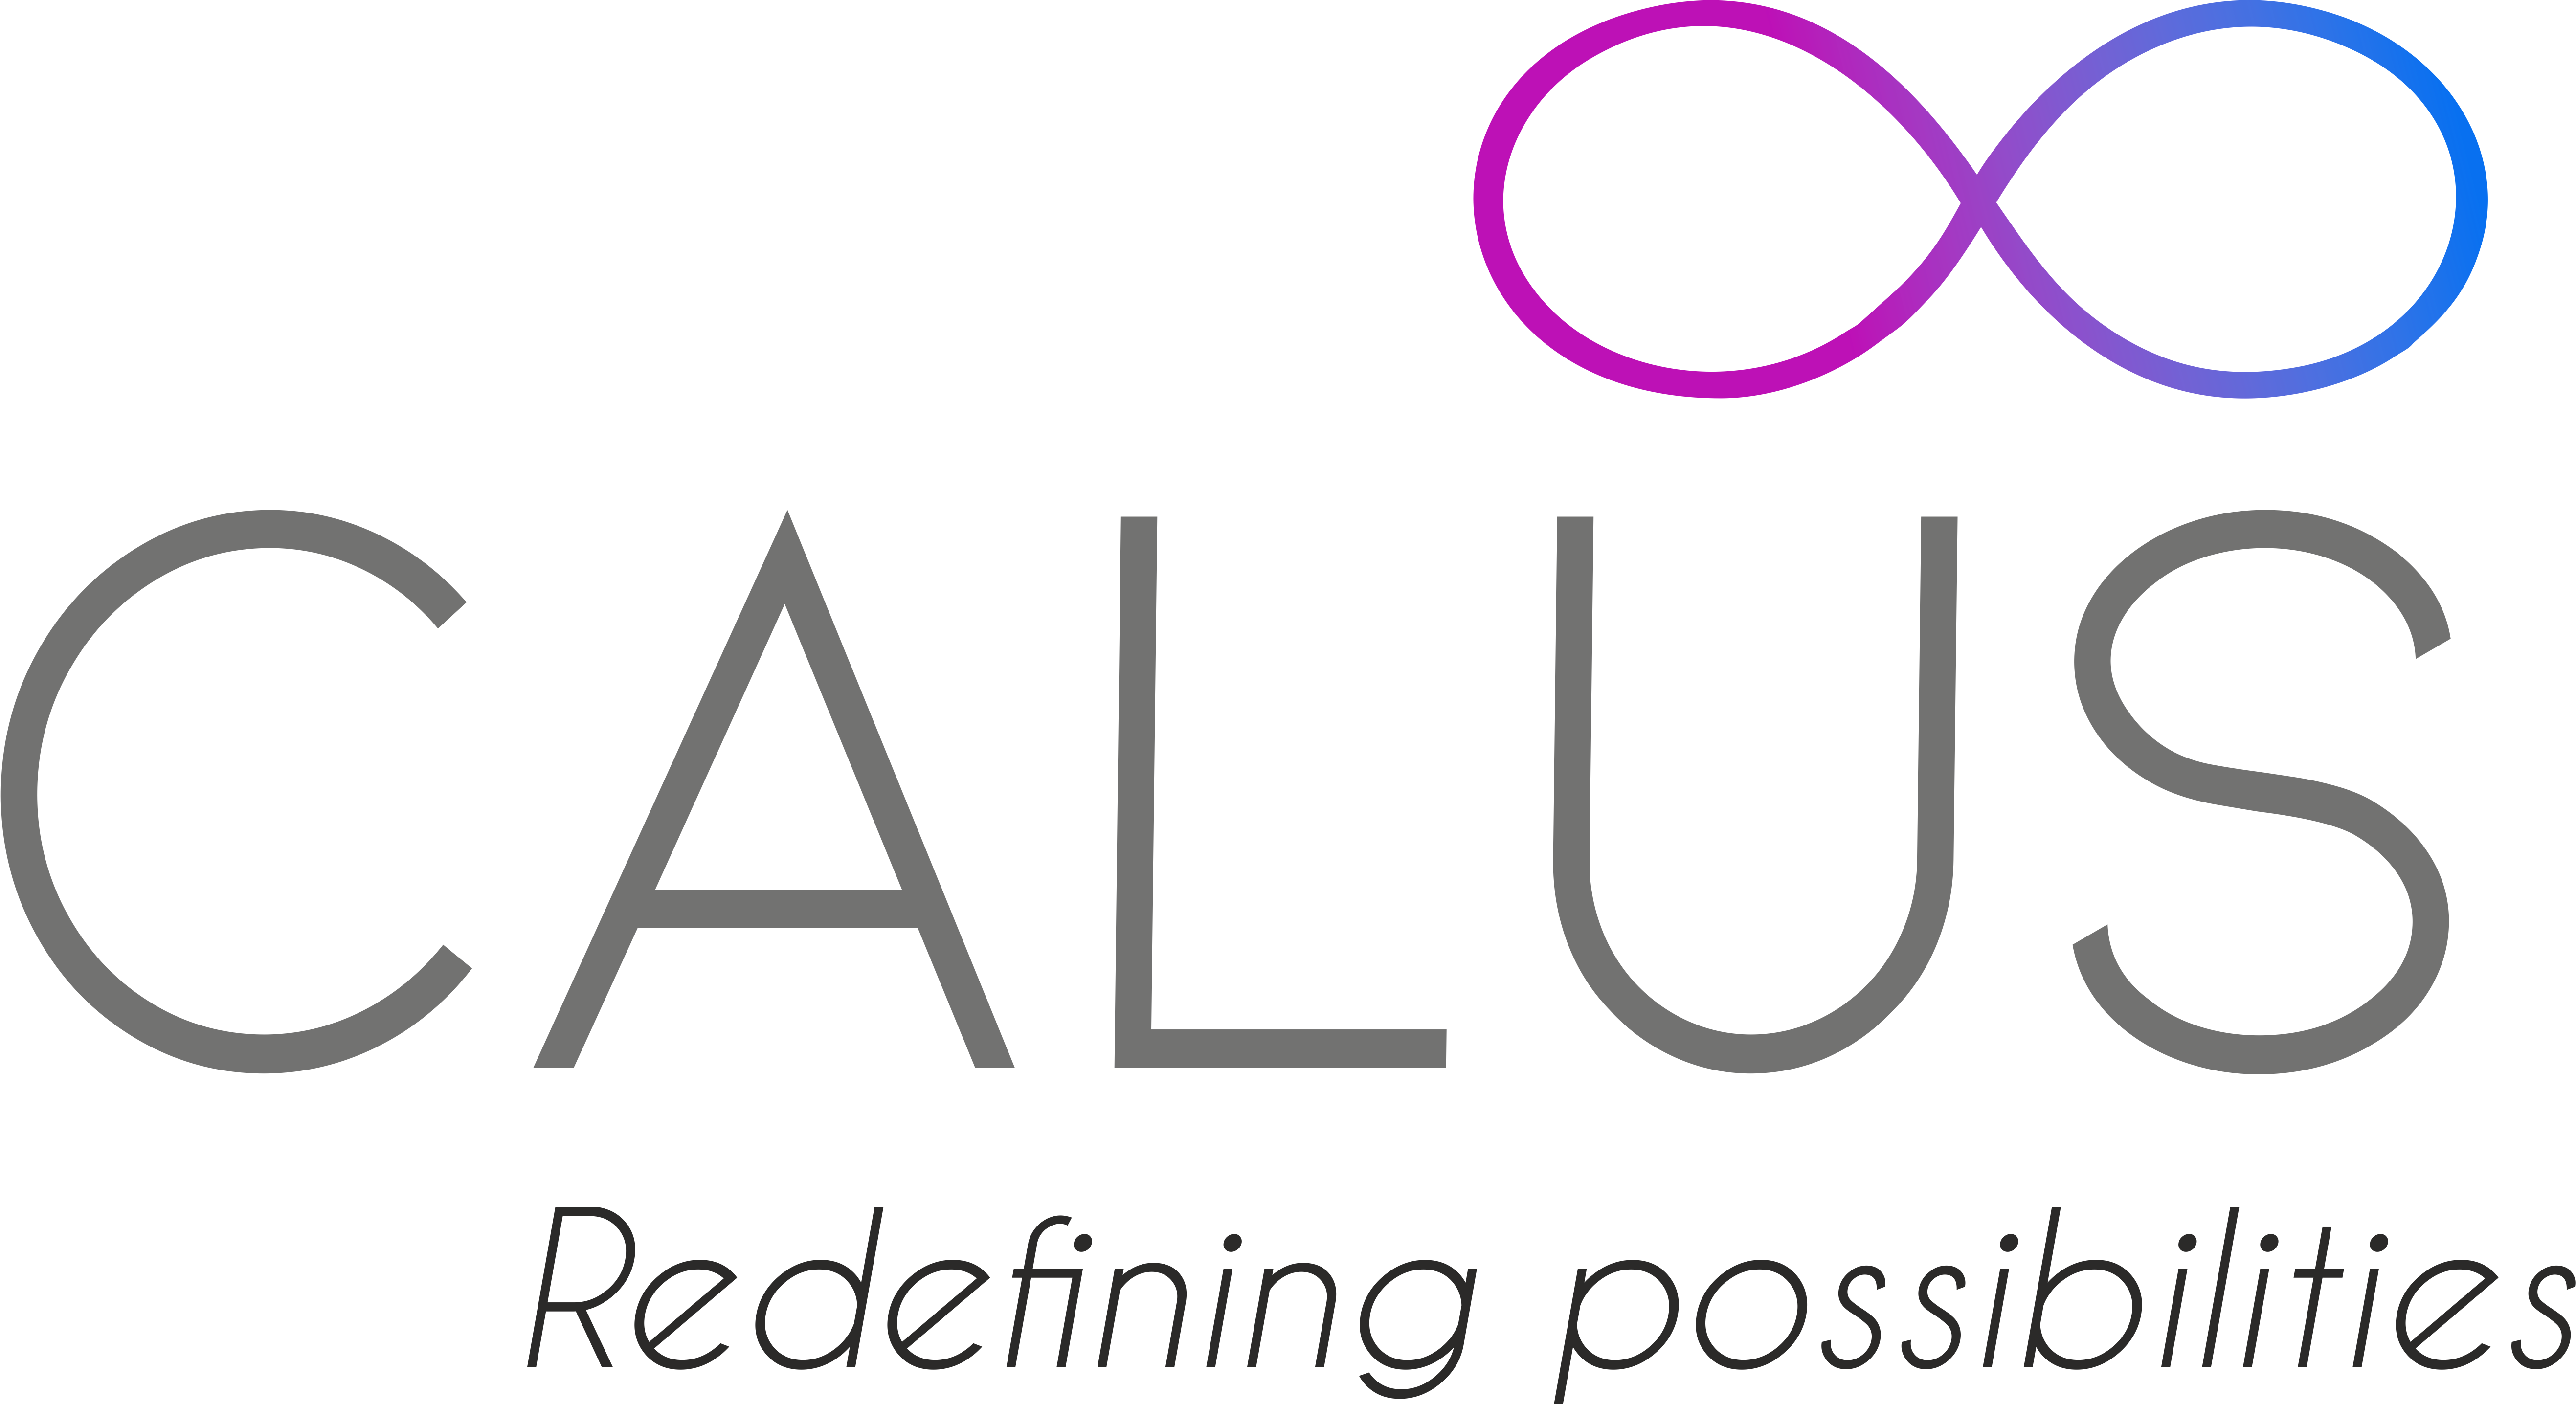 Calus Innovations - 1. SmartSwitch
2. Ai home automation
3. IoT